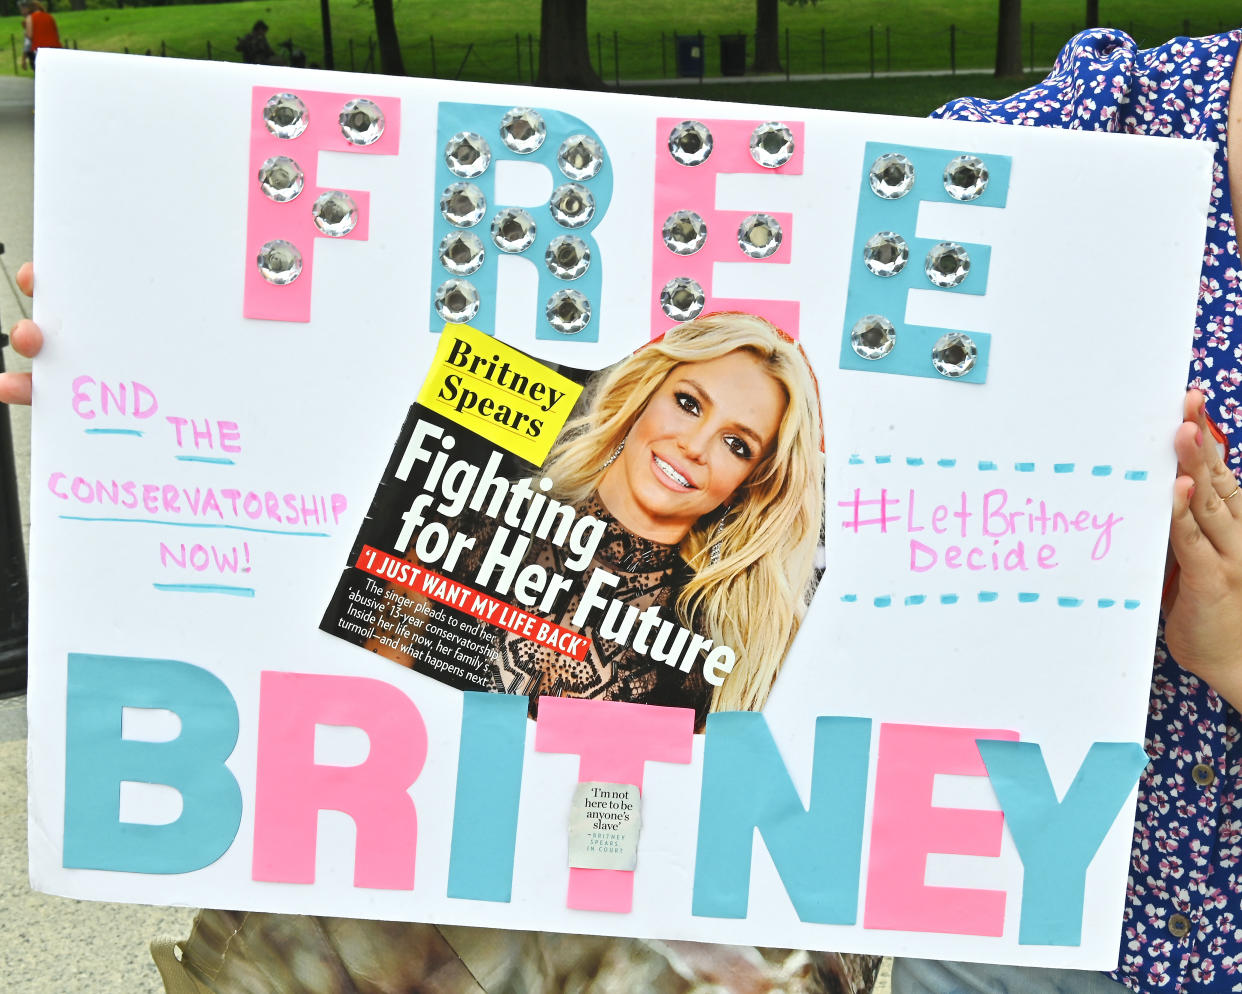 Signs at the #FreeBritney Rally at the Lincoln Memorial in July  in Washington, D.C. The #FreeBritney movement seeks an end to a conservatorship of the singer managed by her father, Jamie Spears, and Jodi Montgomery, which controls her assets and business dealings, following her involuntary hospitalization for mental care in 2008. (Shannon Finney/Getty Images)